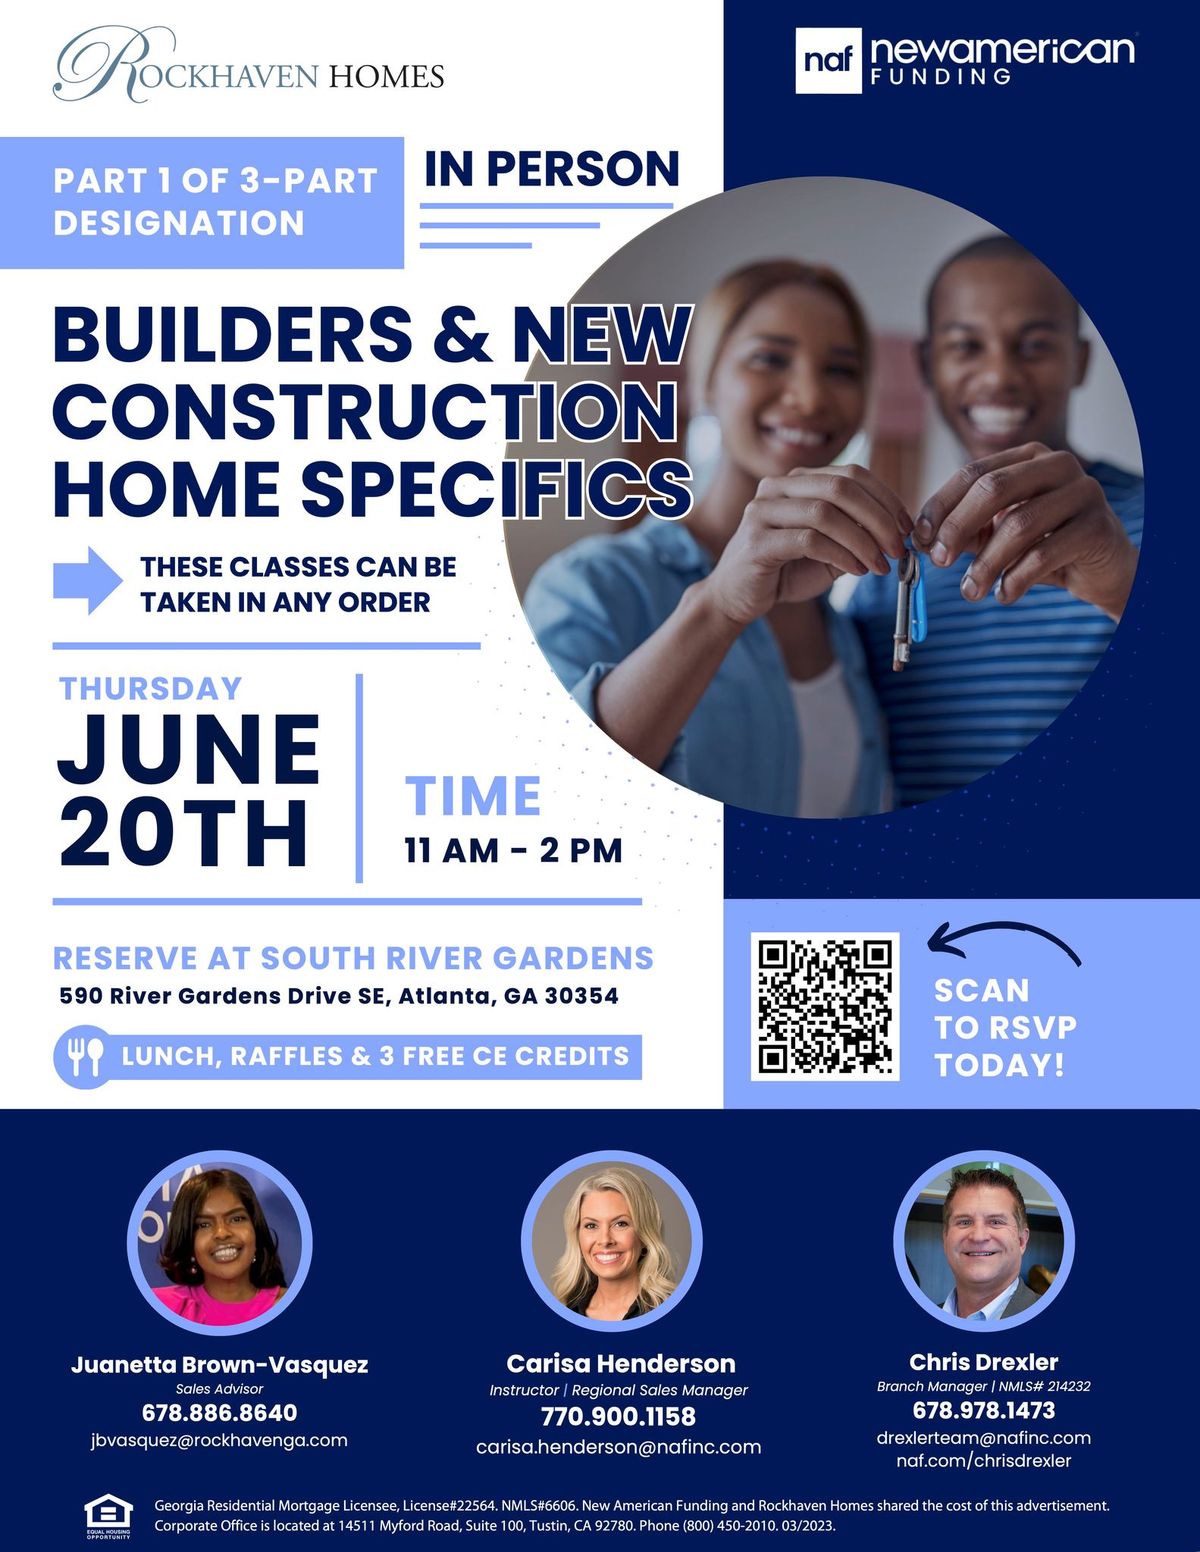 Builders & New Construction CE Class - Reserve at South River Gardens